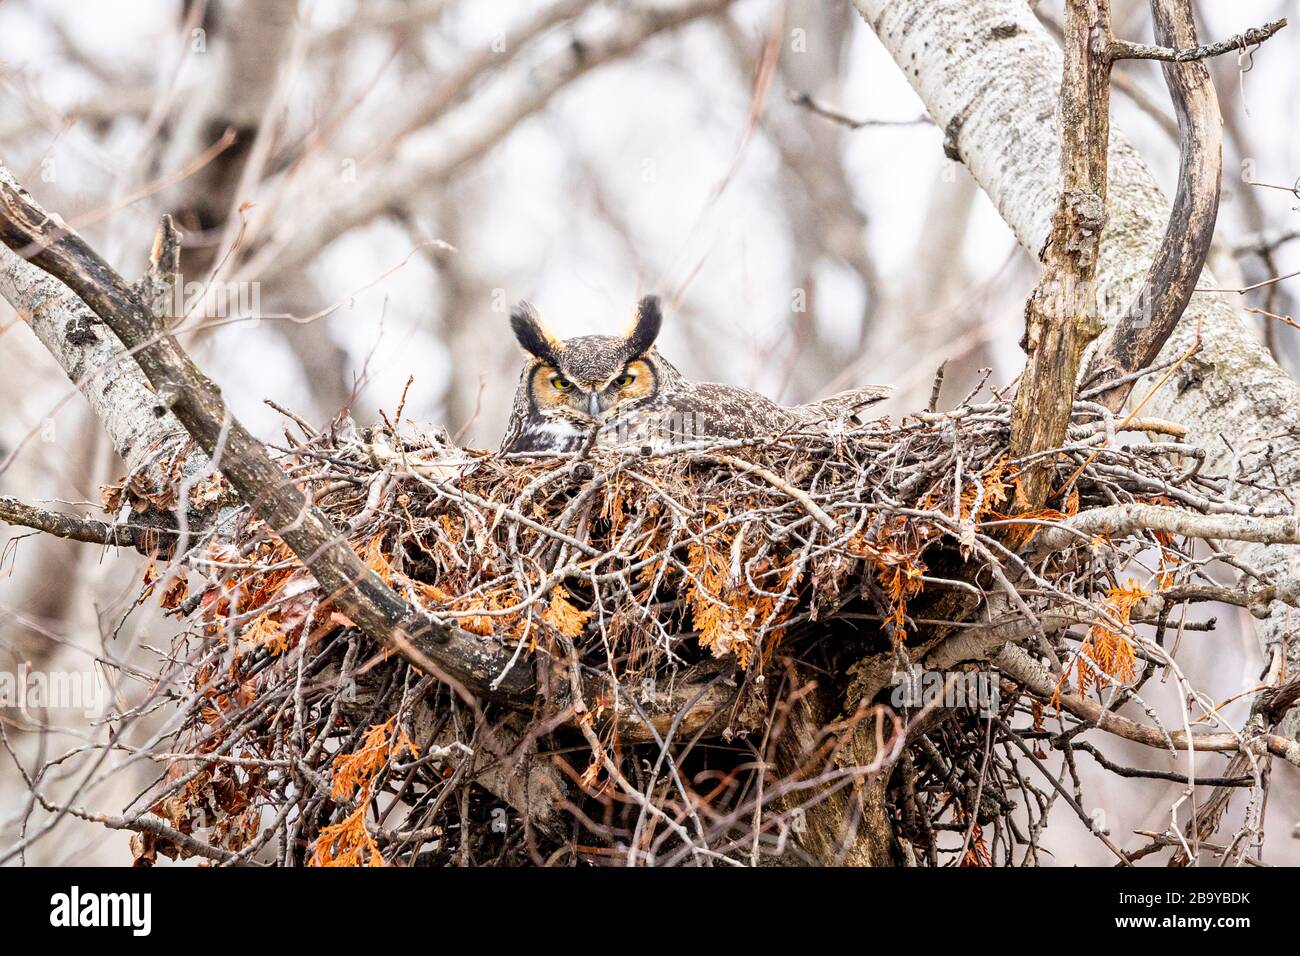 BLUE MOUNTAINS, ONTARIO, CANADA - March 24, 2020: A wild Great Horned Owl ( Bubo Virginianus ), part of the Strigiformes order, and Strigidae family, Stock Photo